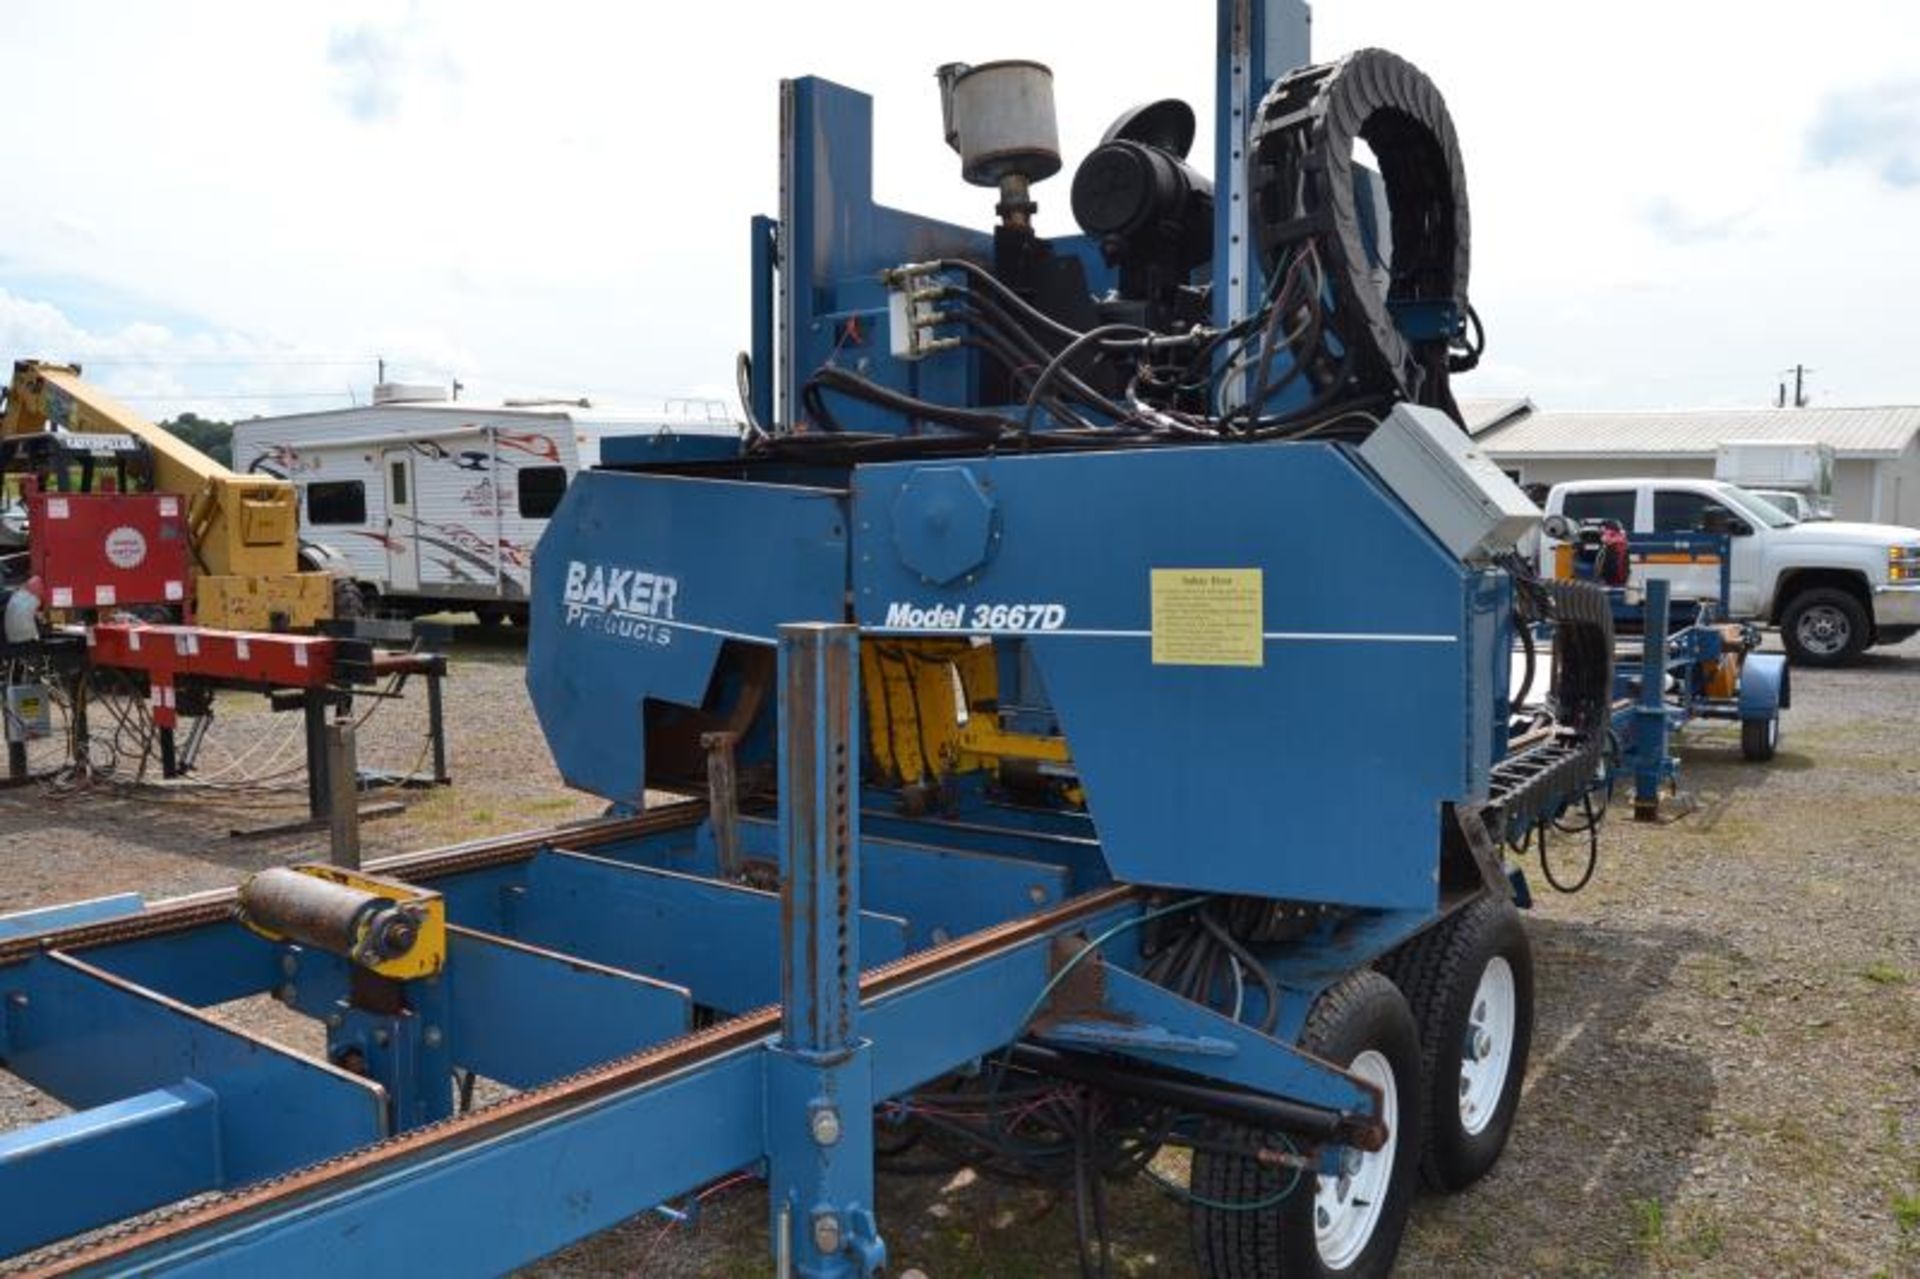 BAKER 3667D PORTABLE BAND MILL - Image 5 of 5